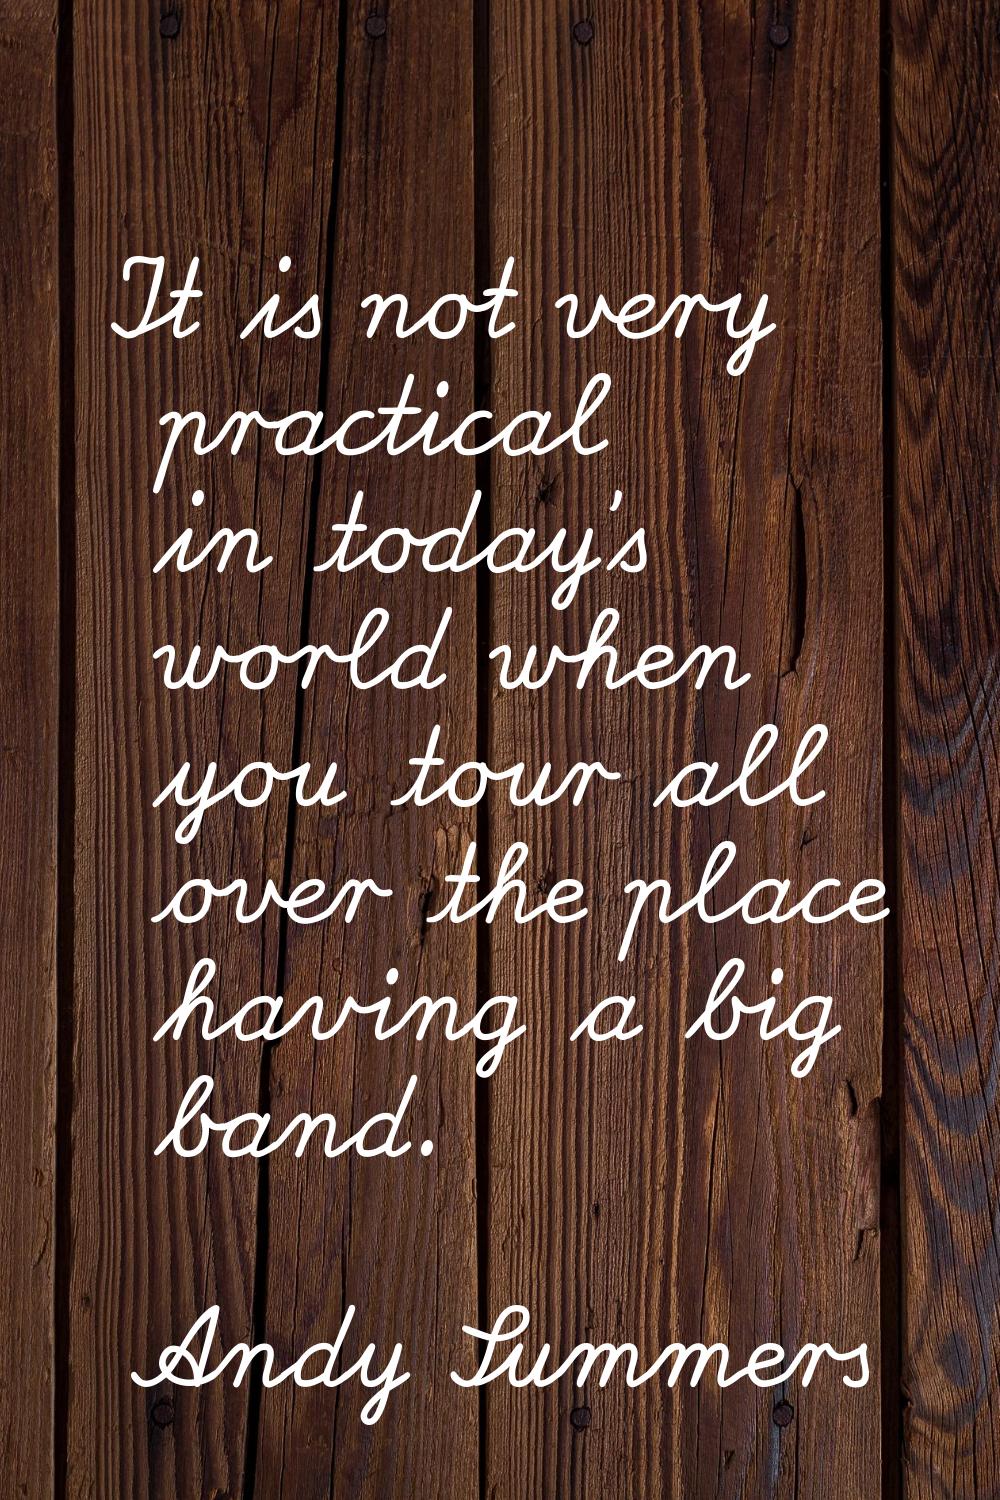 It is not very practical in today's world when you tour all over the place having a big band.